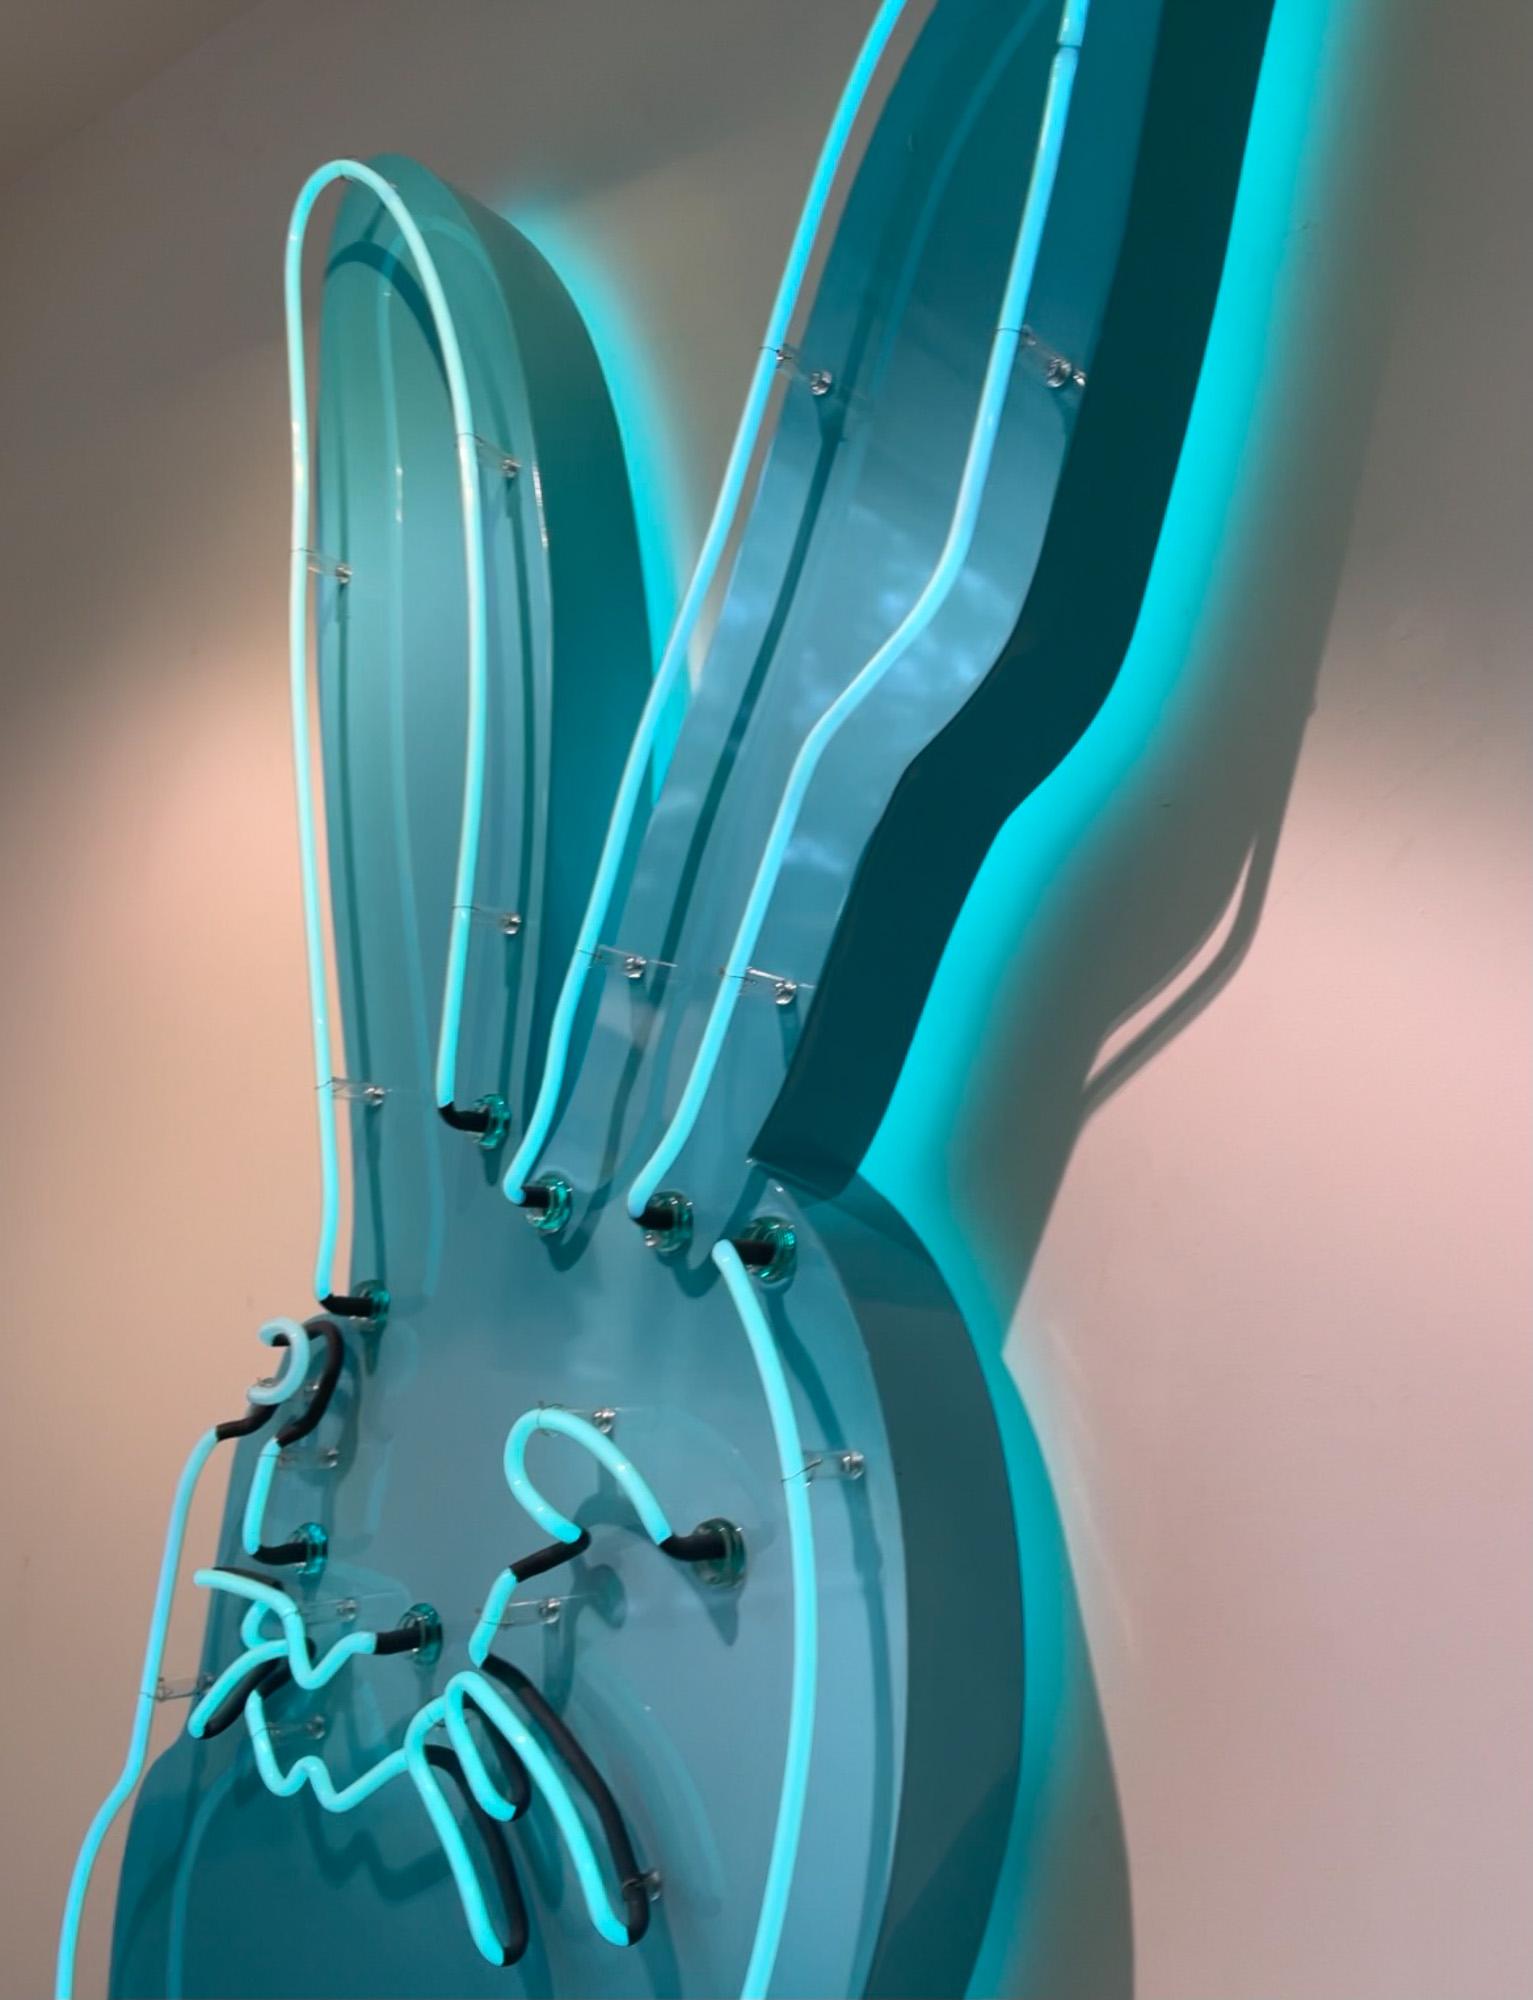 Hunt Slonem neon lighted bunny on aluminum. This piece requires especially careful handling. Professional installation is recommended. Please be aware that neon if very fragile and should be plugged in and kept on often. A nearby electrical outlet